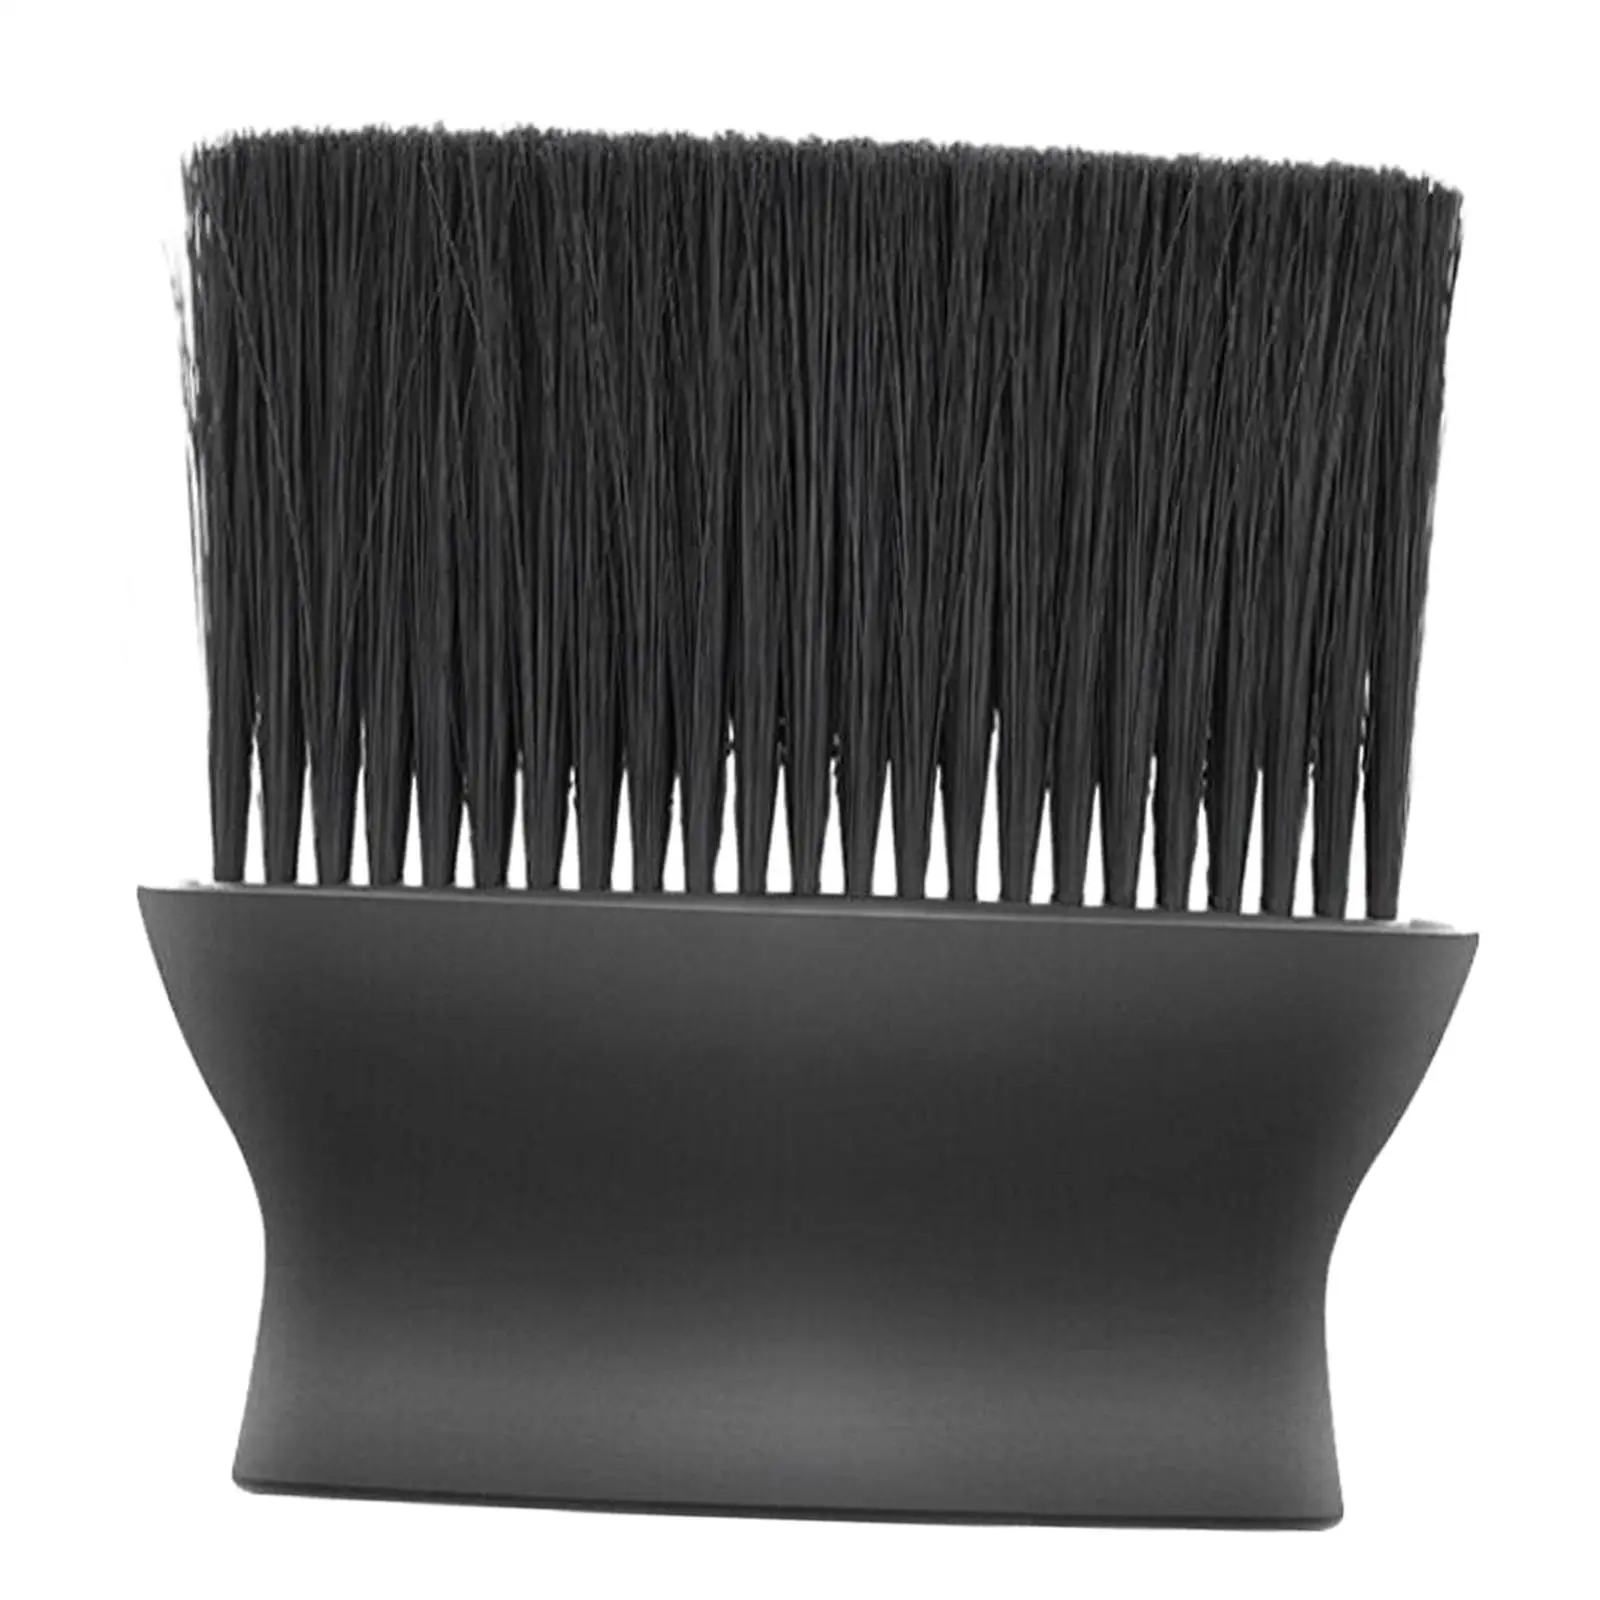 Car Interior Duster Soft Bristles Flexible Automotive Cleaning Brush for Wheel Air Conditioner Vents Window Laptop Seat